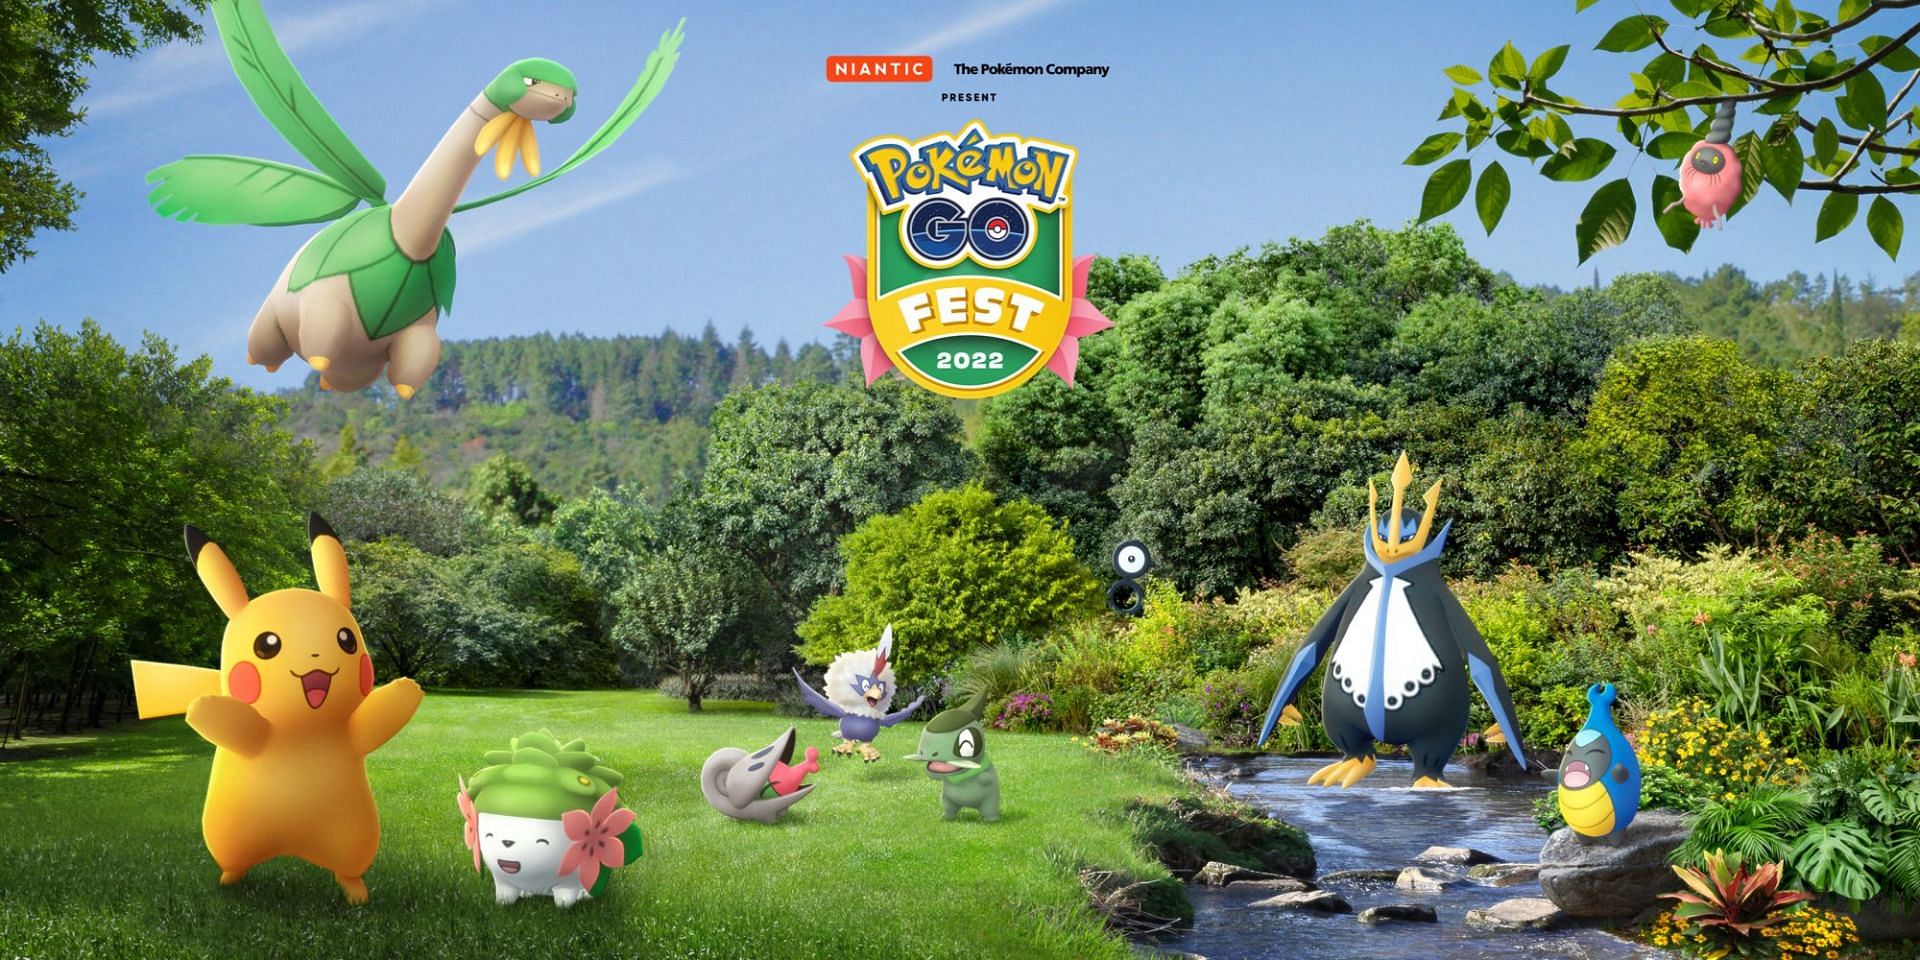 Shaymin appears alongside Pikachu, Tropius, Axew and more in GO Fest 2022&#039;s promotional image (Image via Niantic)